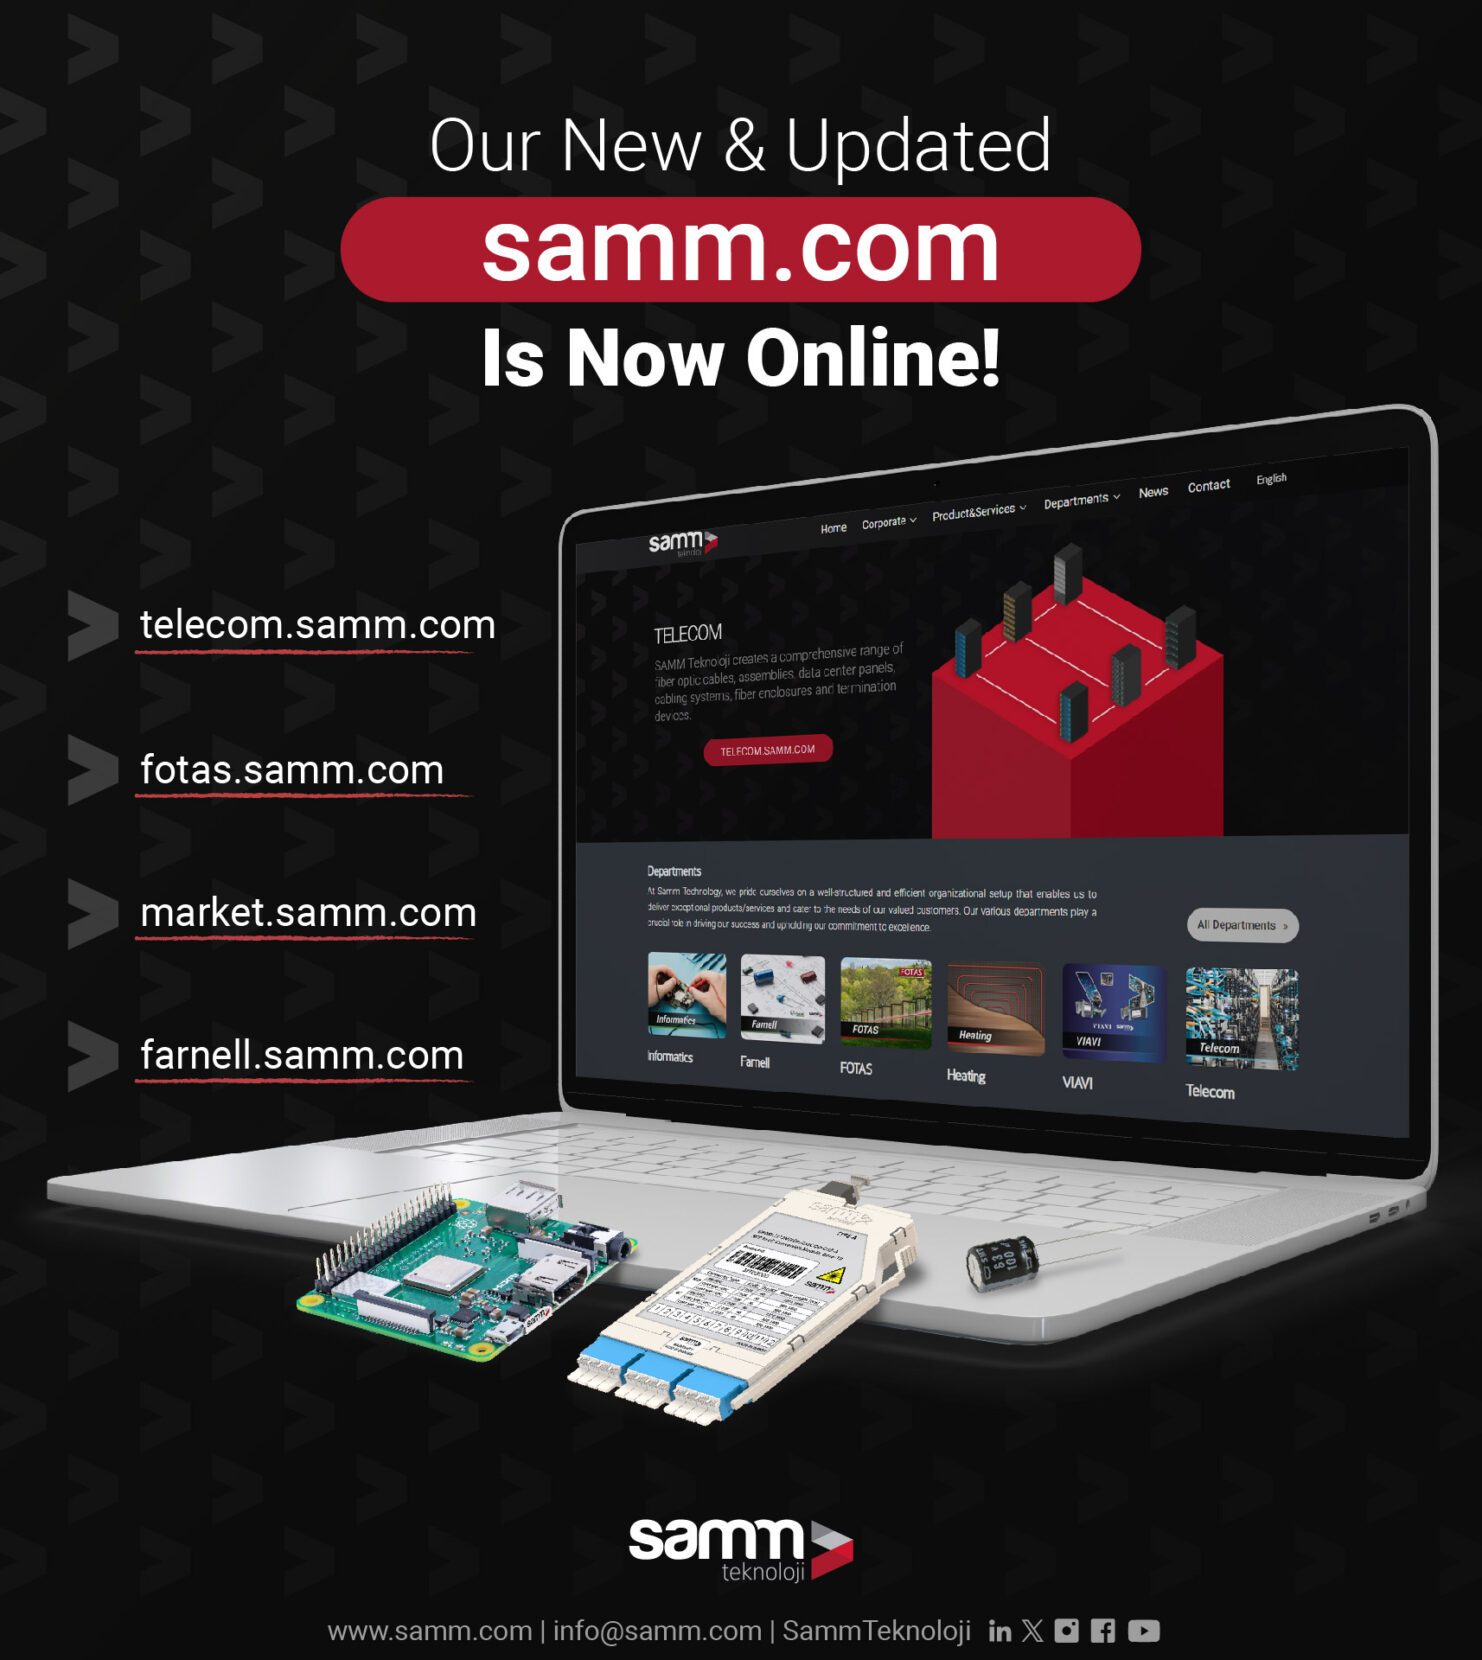 Samm.com Now Provides a Faster, Simpler, and Easier Experience.